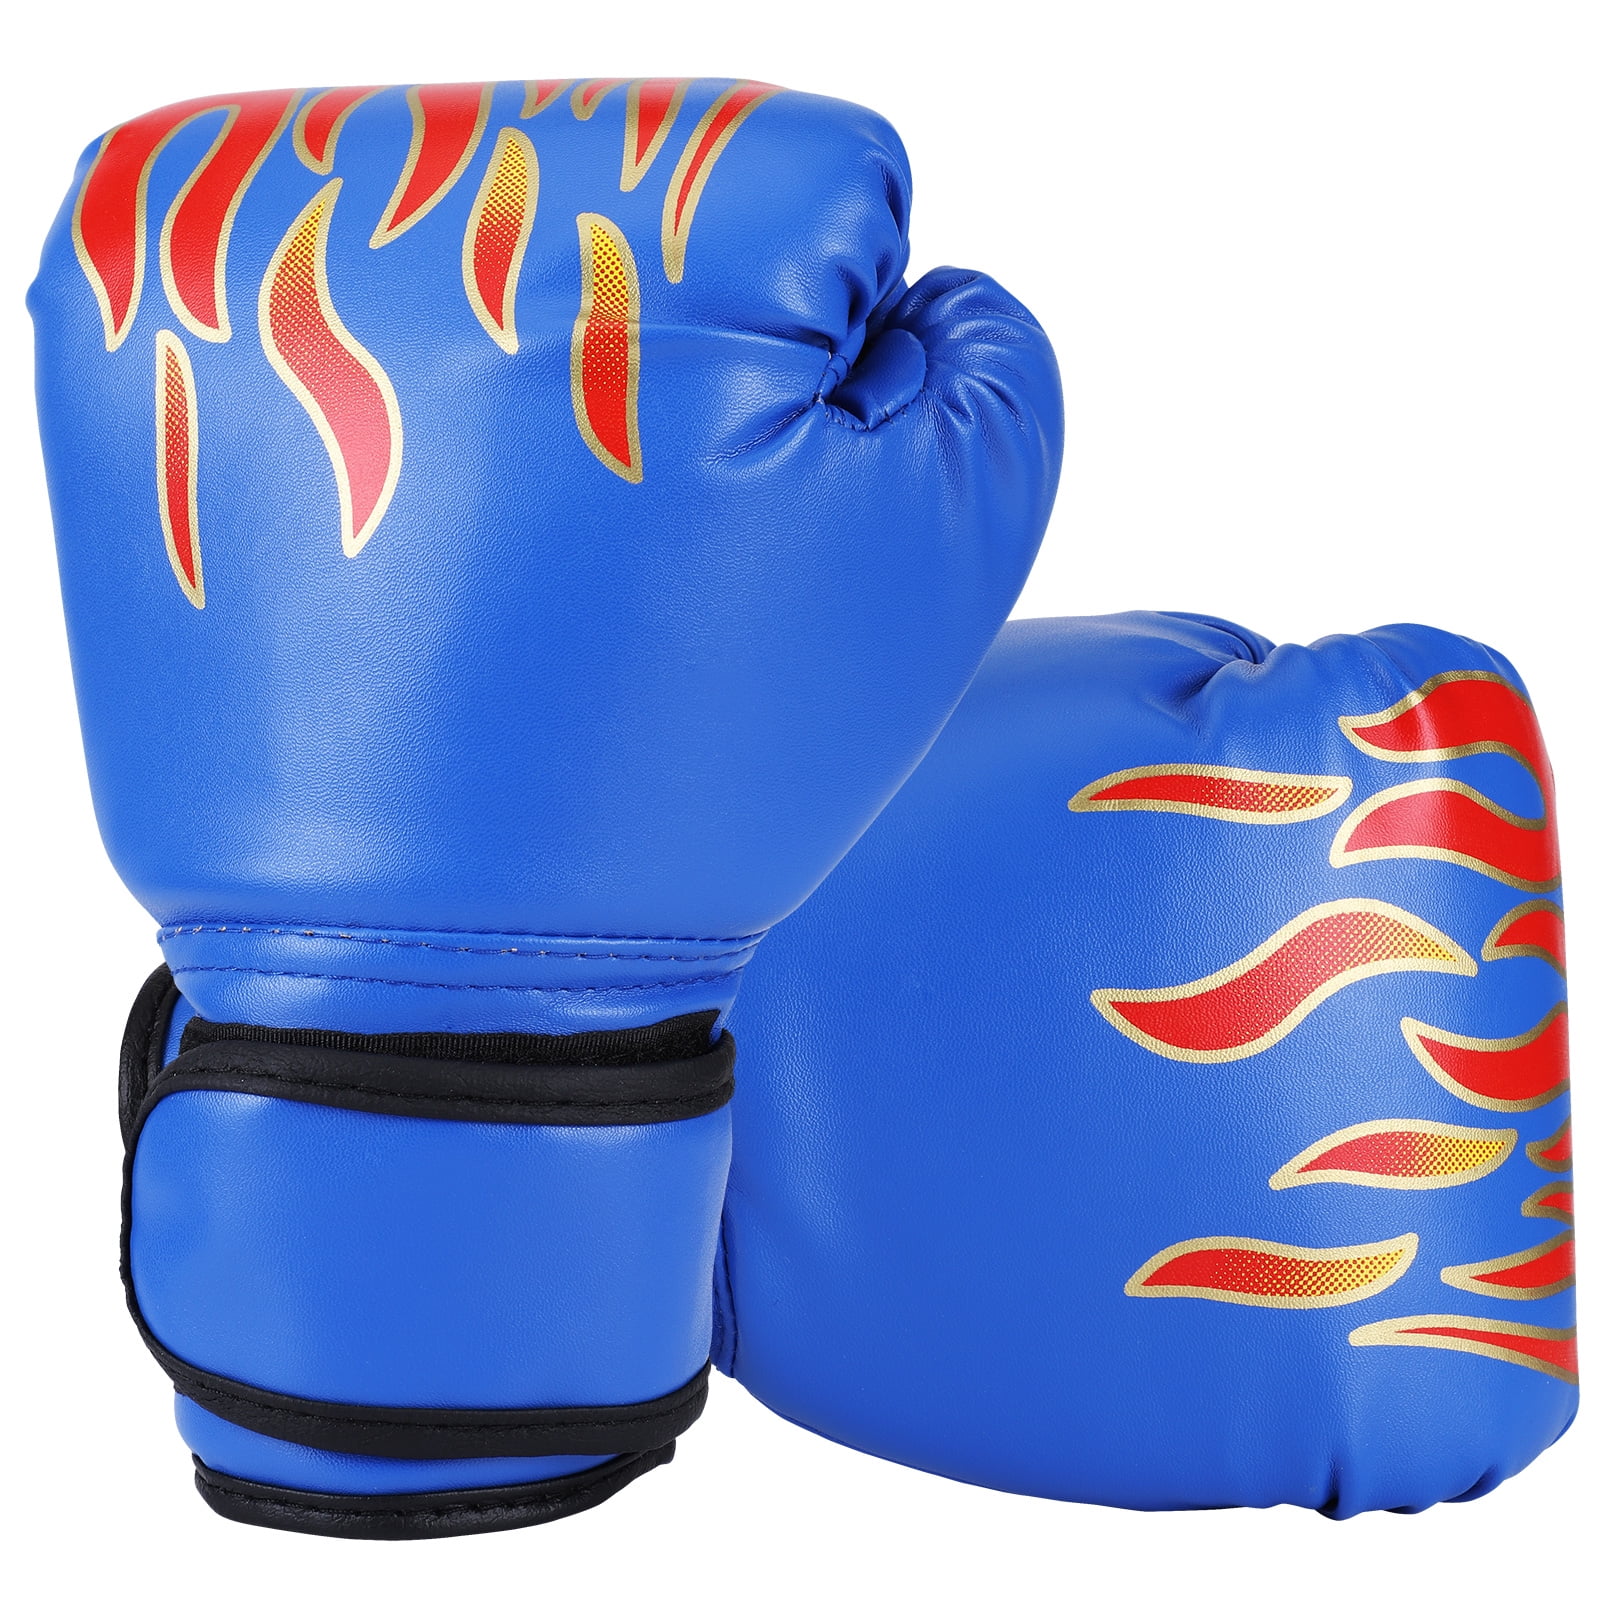 Sanda Protective Gear Set of 4 Boxing Fighting Protective Gear